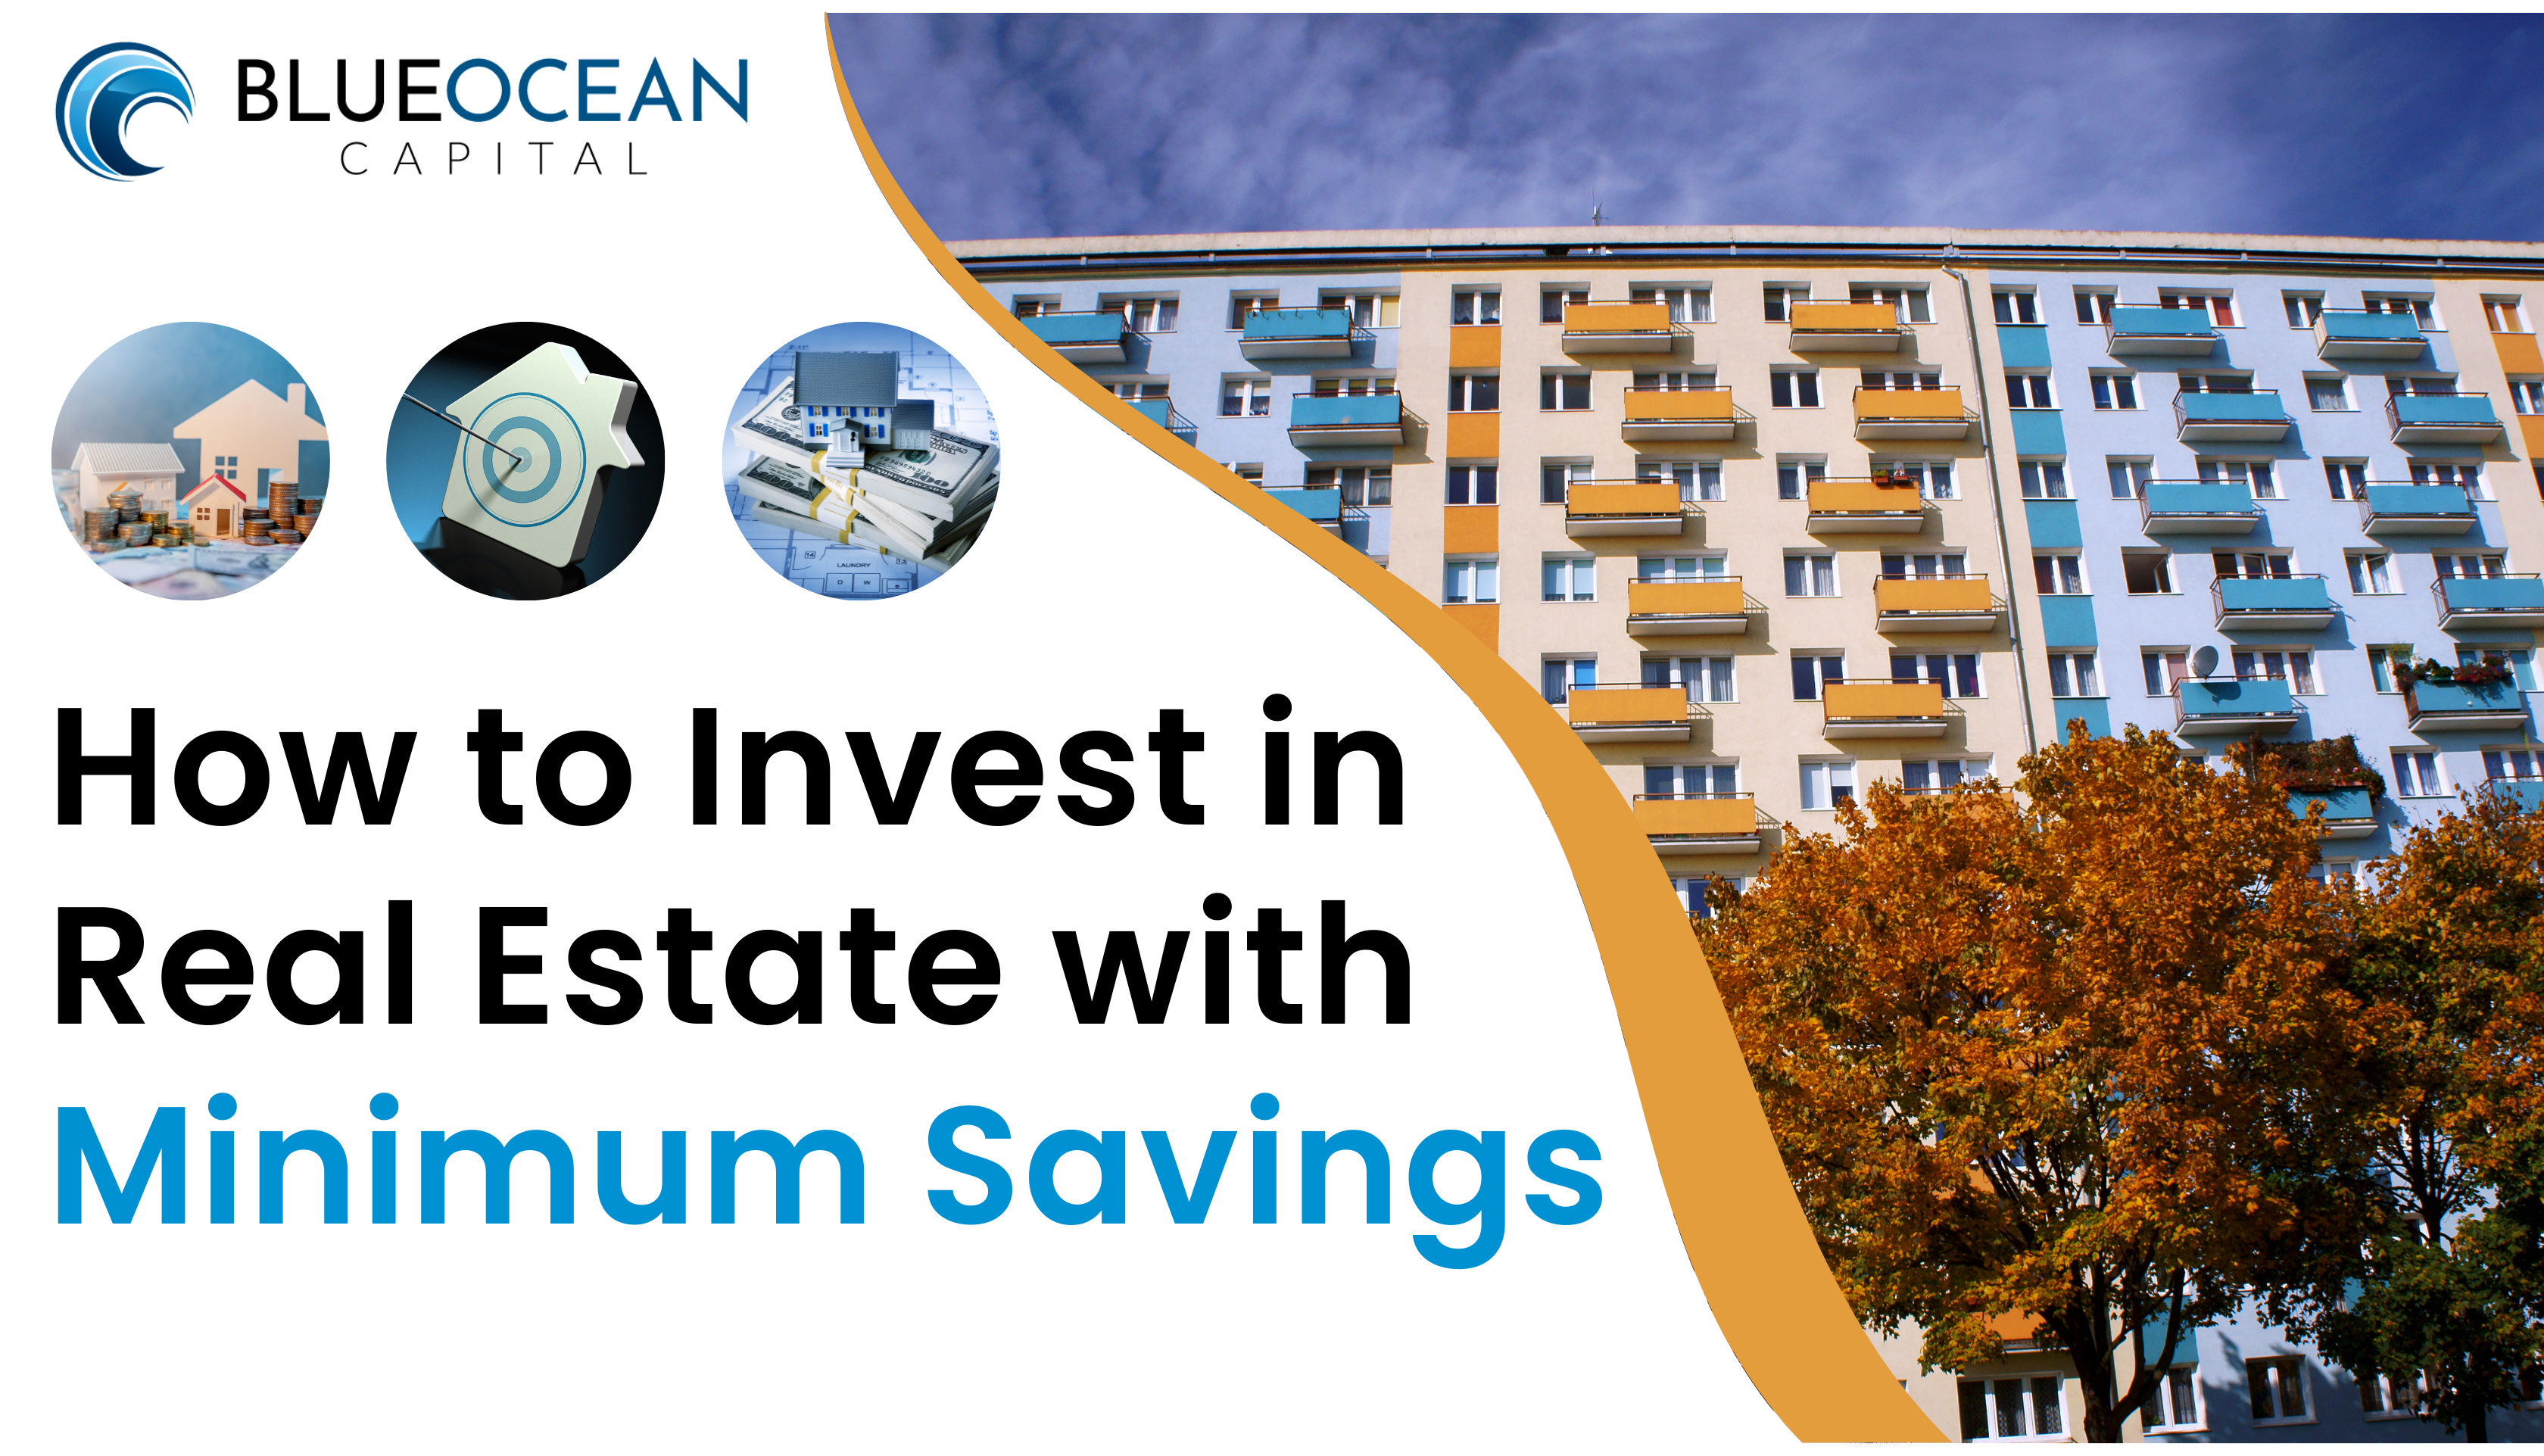 How to Invest in Real Estate with minimum Savings